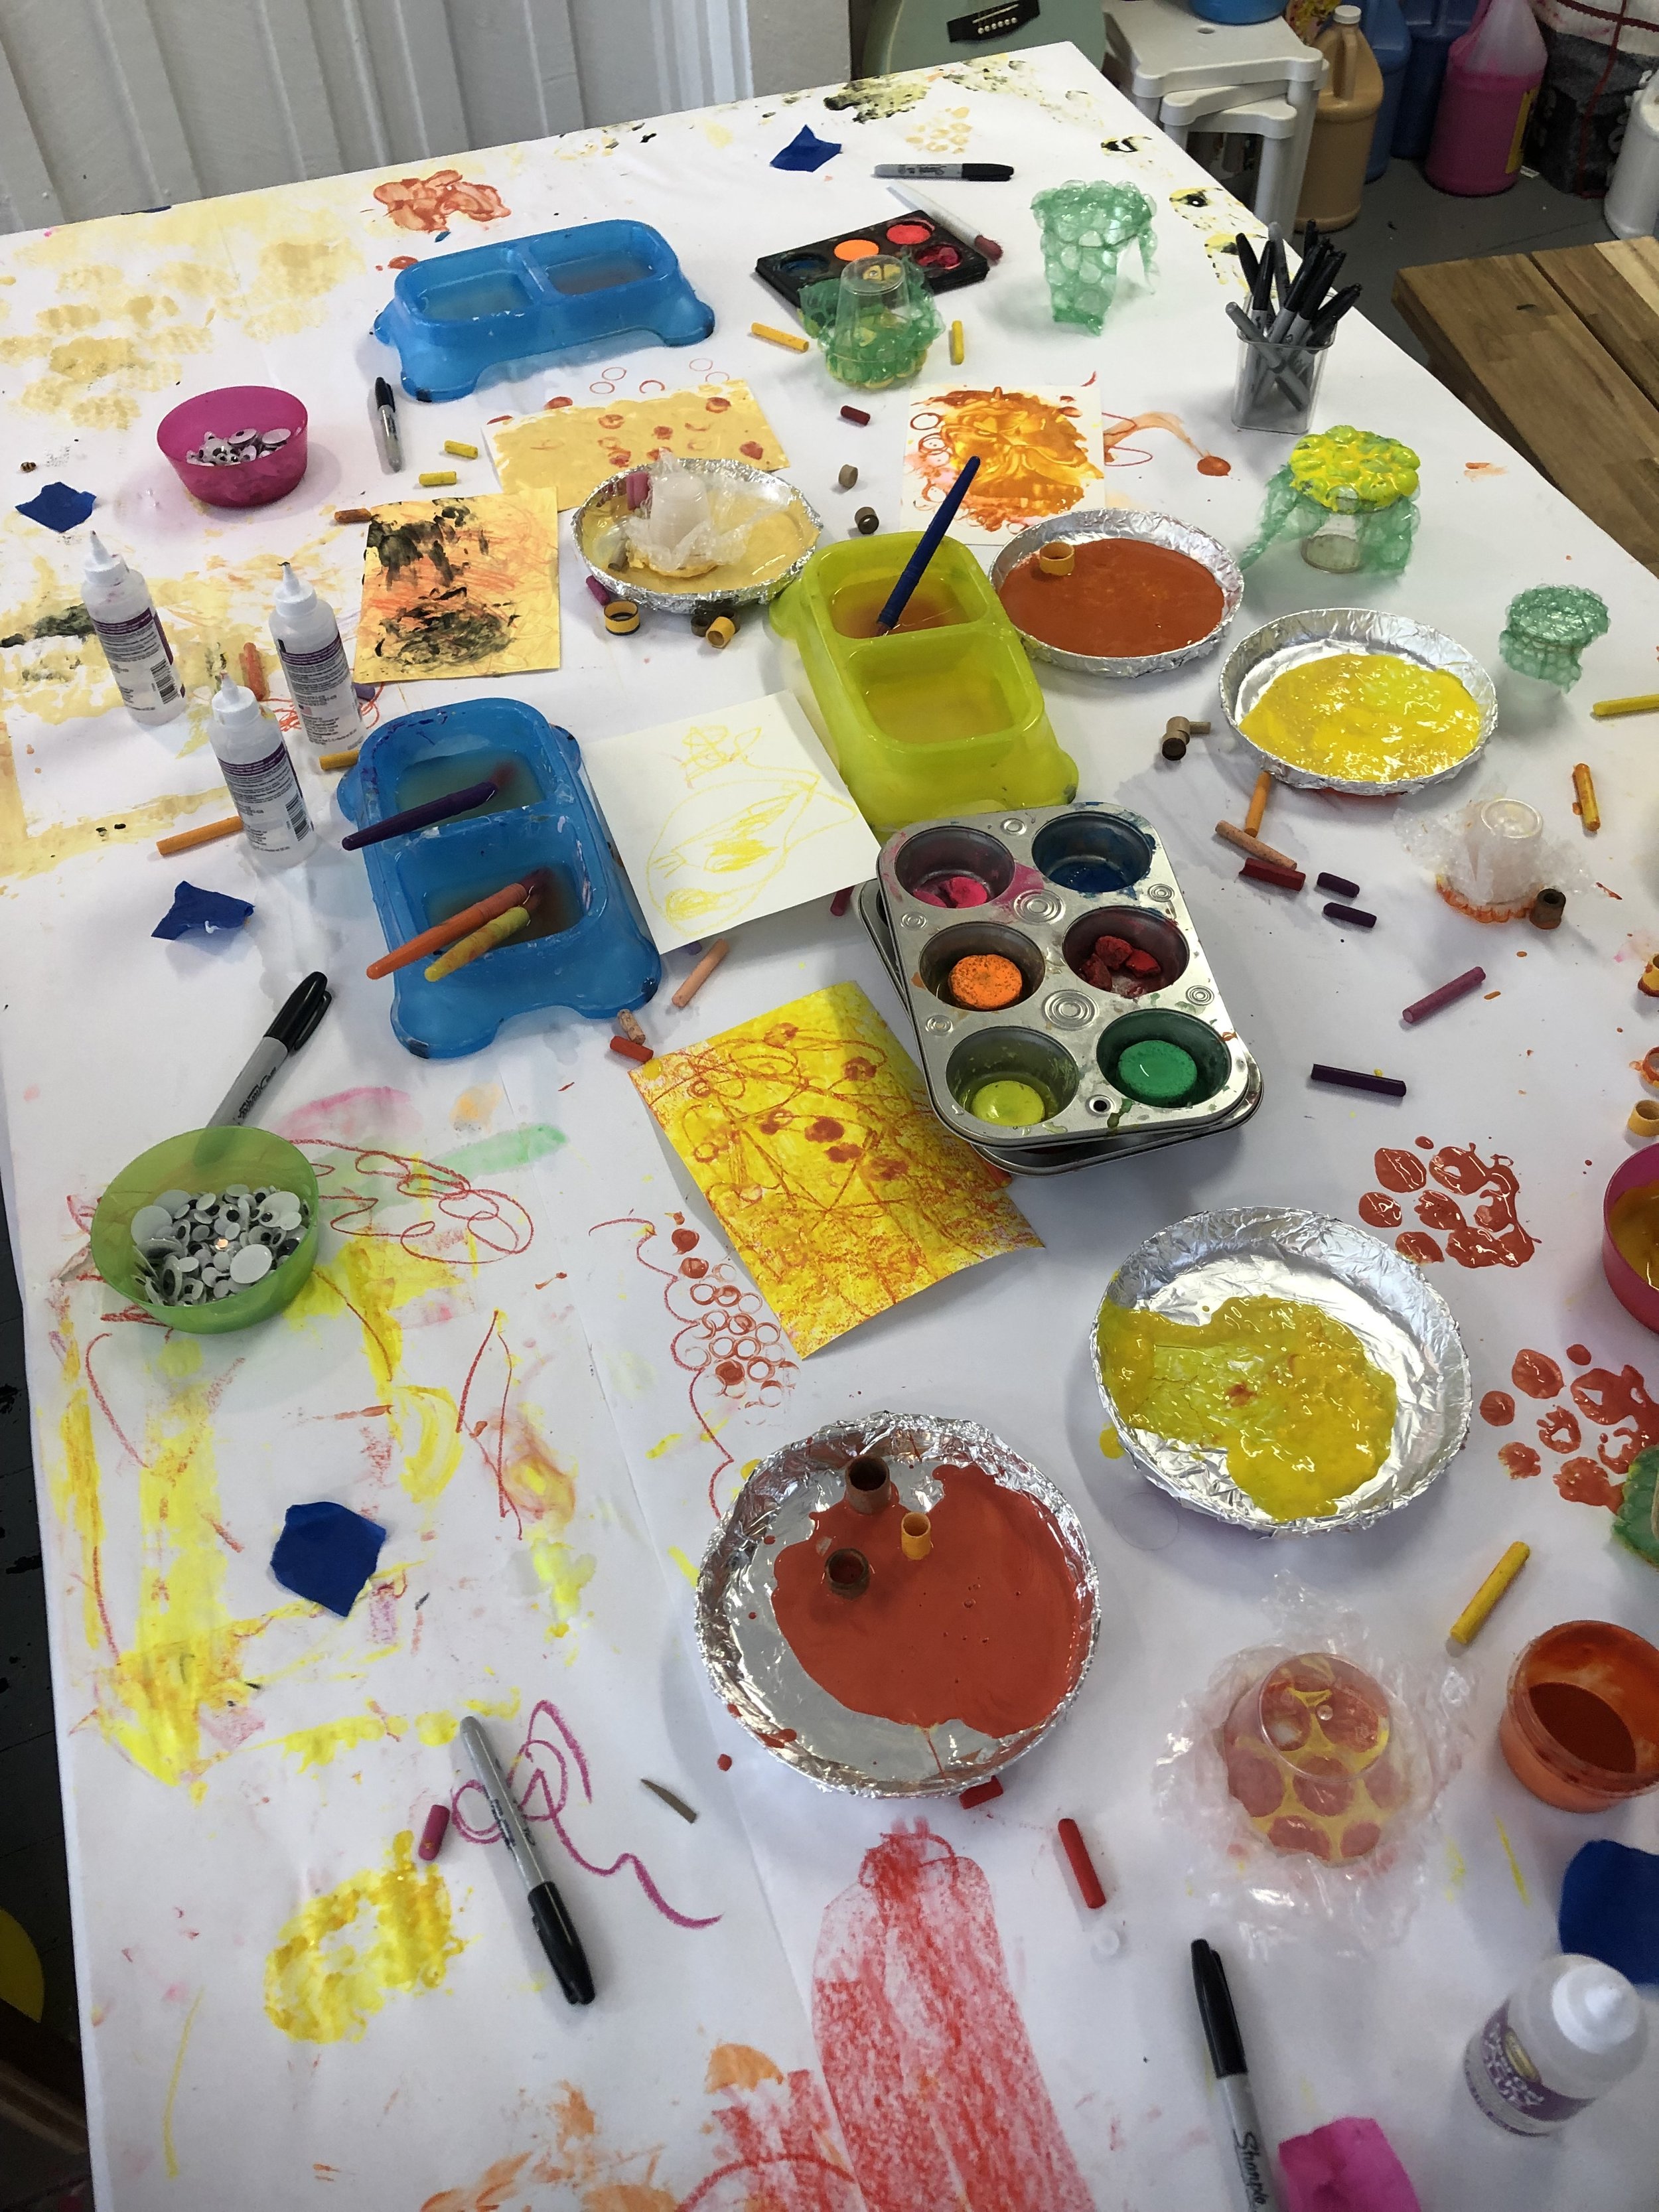 Art at Home — Creative activities, art projects, things to do in Rhode  Island with children. Art teacher mom blog. — Harbor Creative Arts